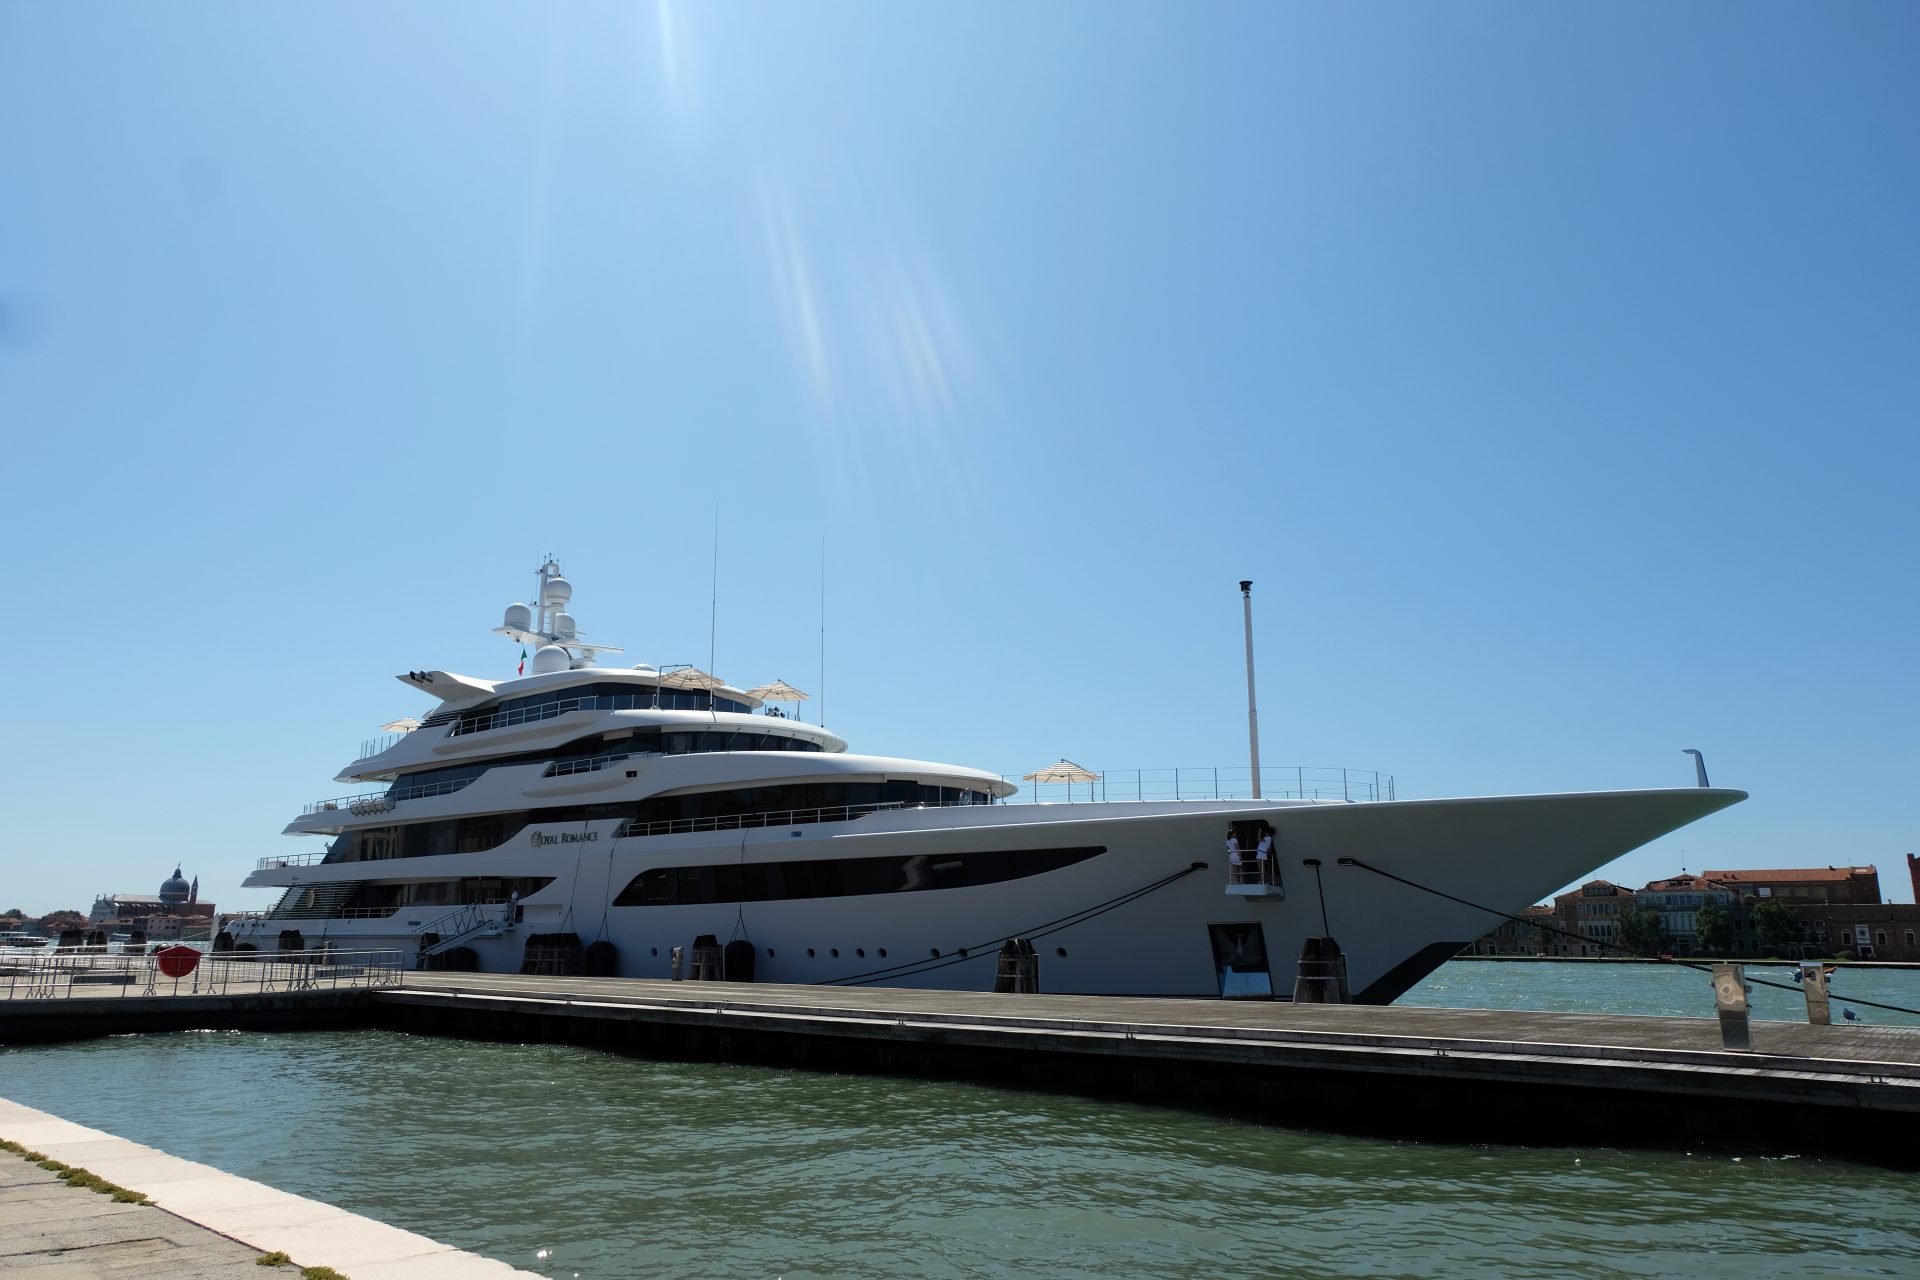 <p><span>The Royal Romance is a 92-meter or roughly 300-foot vessel that the Dutch shipbuilder Feadship called a “pure custom creation.” The yacht was built back in 2015 and can host upwards of 14 guests and 21 crewmembers in 7 staterooms. </span></p> <p>Photo Credit: Wiki Commons By Kasa Fue, Own Work, CC BY-SA 4.0</p>